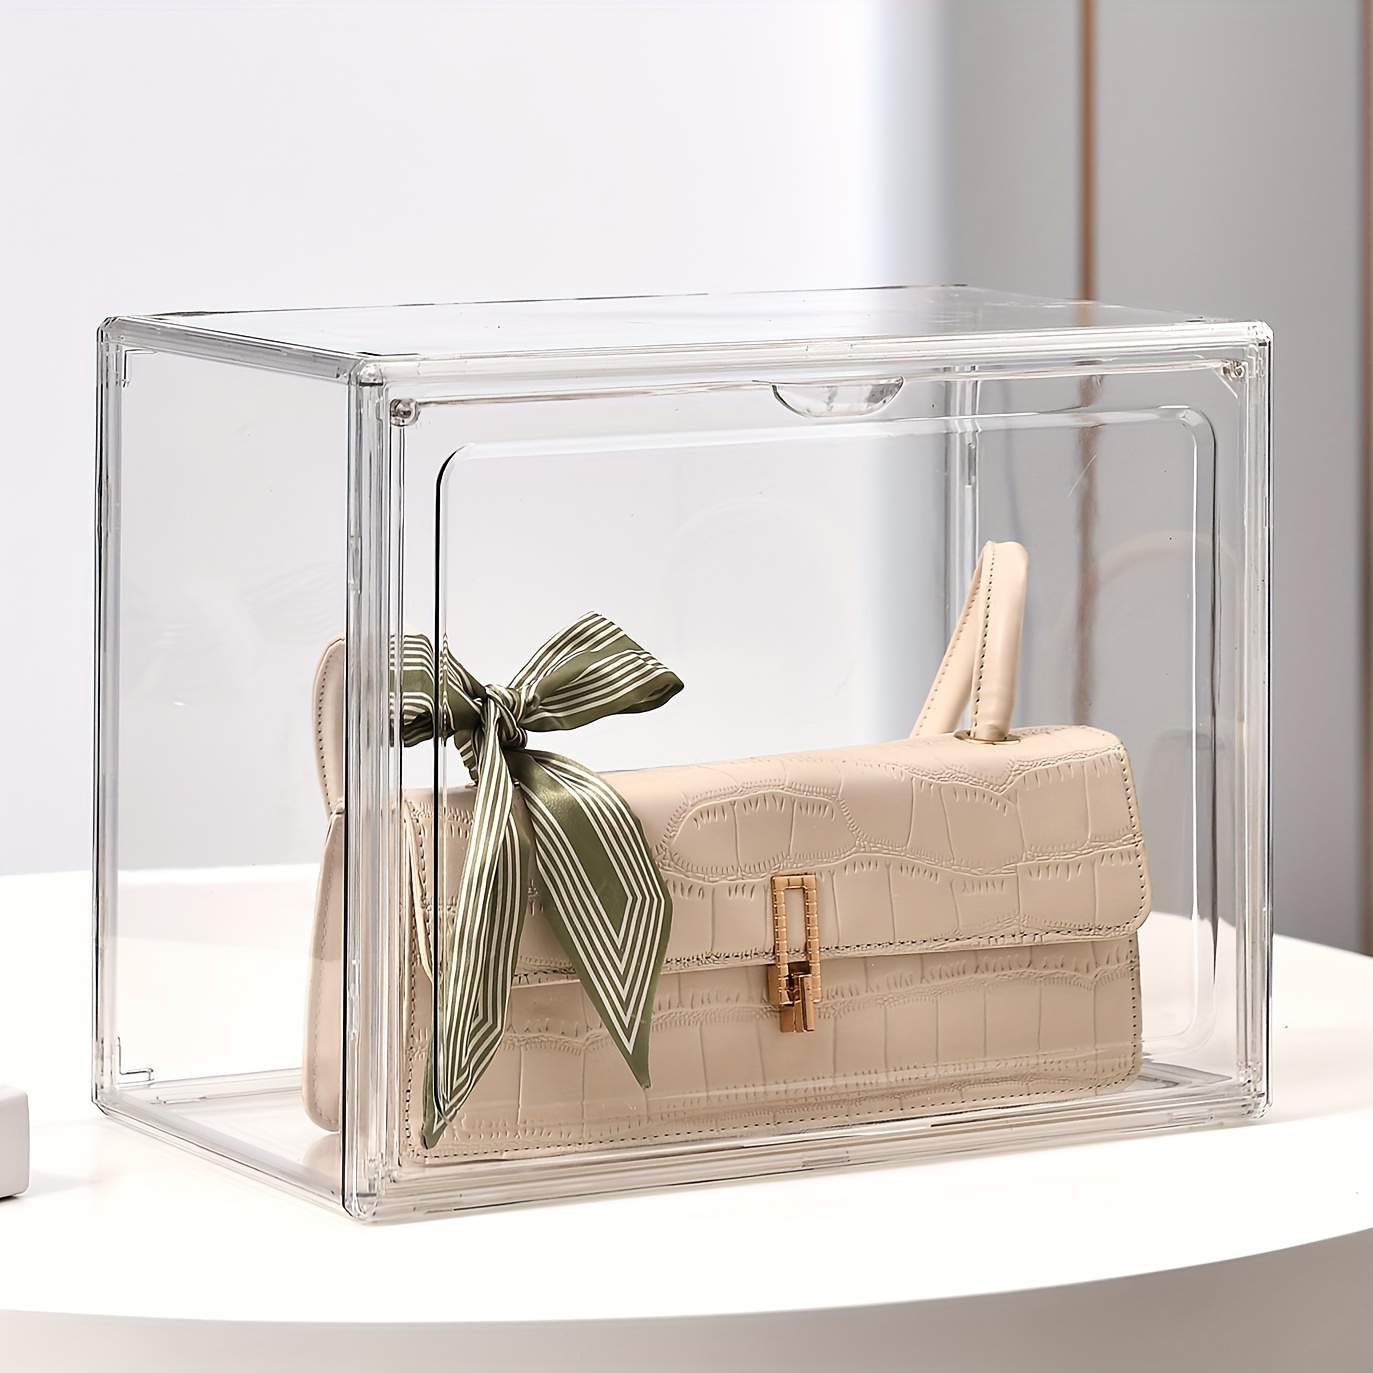 

1pc Clear Plastic Storage Box With Magnetic Closure, Modern Transparent Organizer For Handbags, Cosmetic, Perfume, Acrylic Display Case For Home Decor And Shop Display